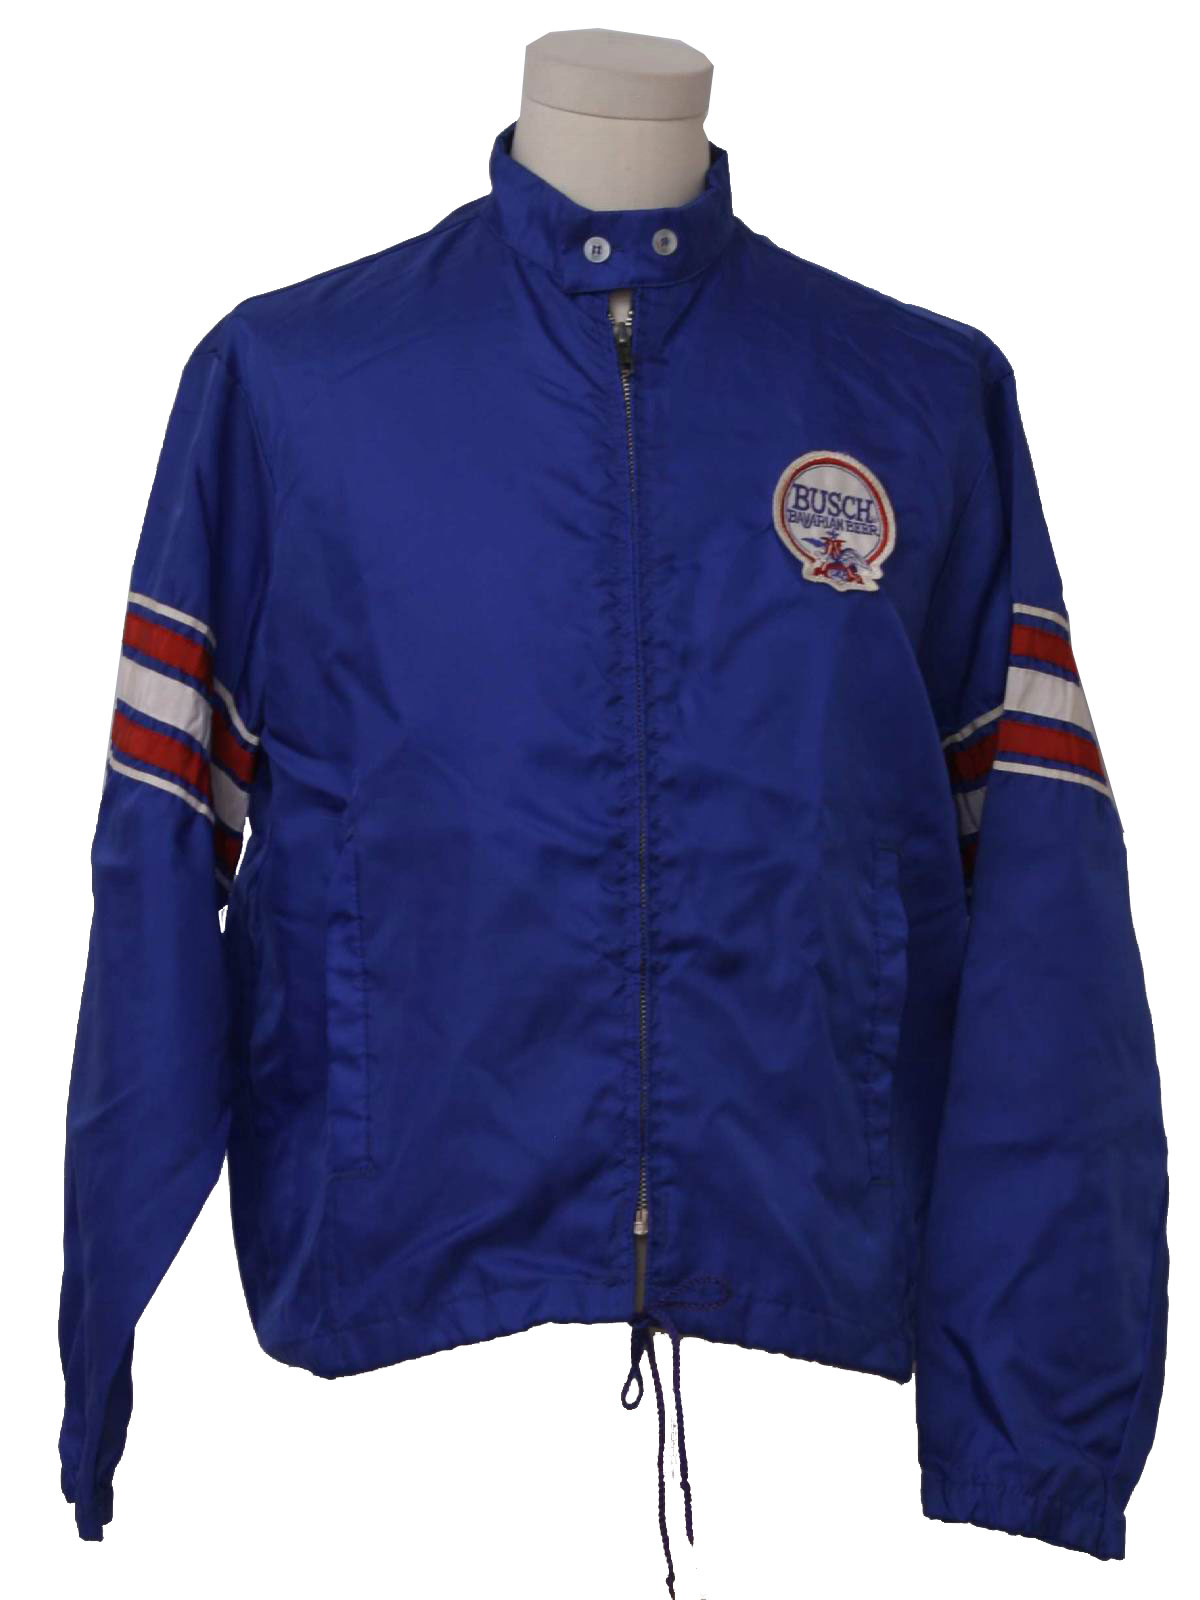 Retro 80's Jacket: 80s -Swingster- Mens royal blue, red and white nylon ...